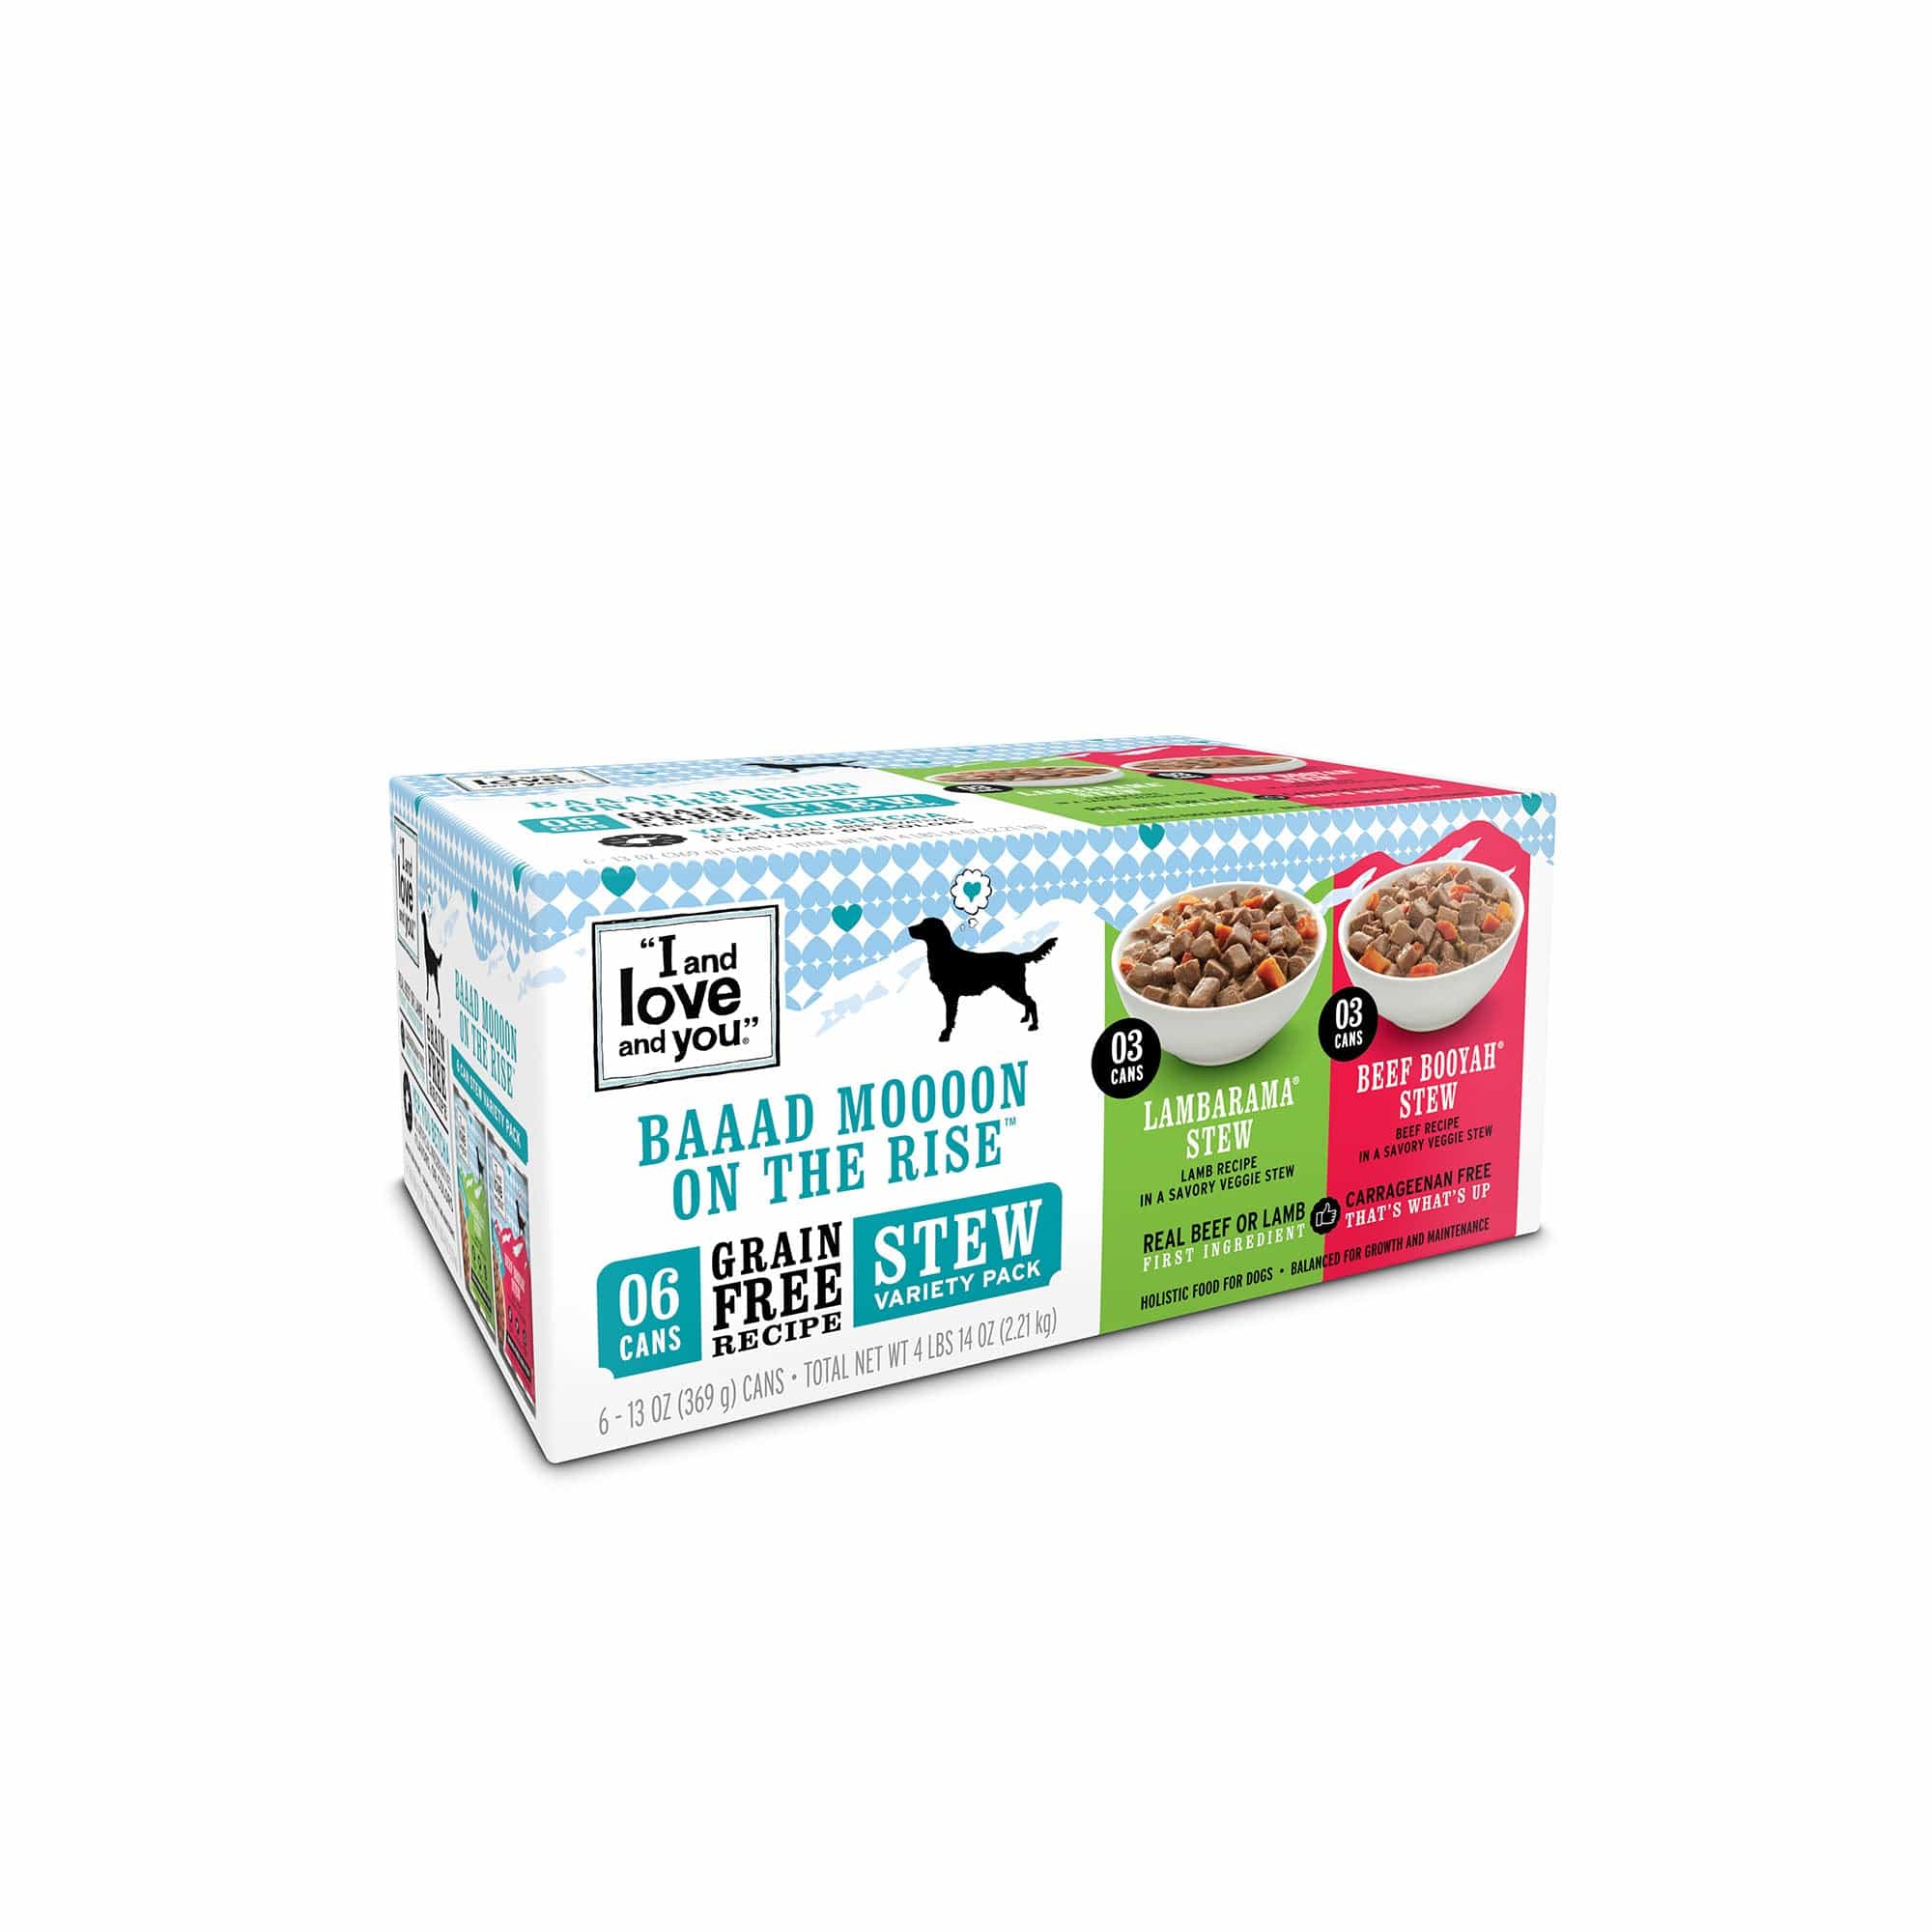 A variety pack of canned wet dog food, including Beef Booyah and Lambarama flavors.